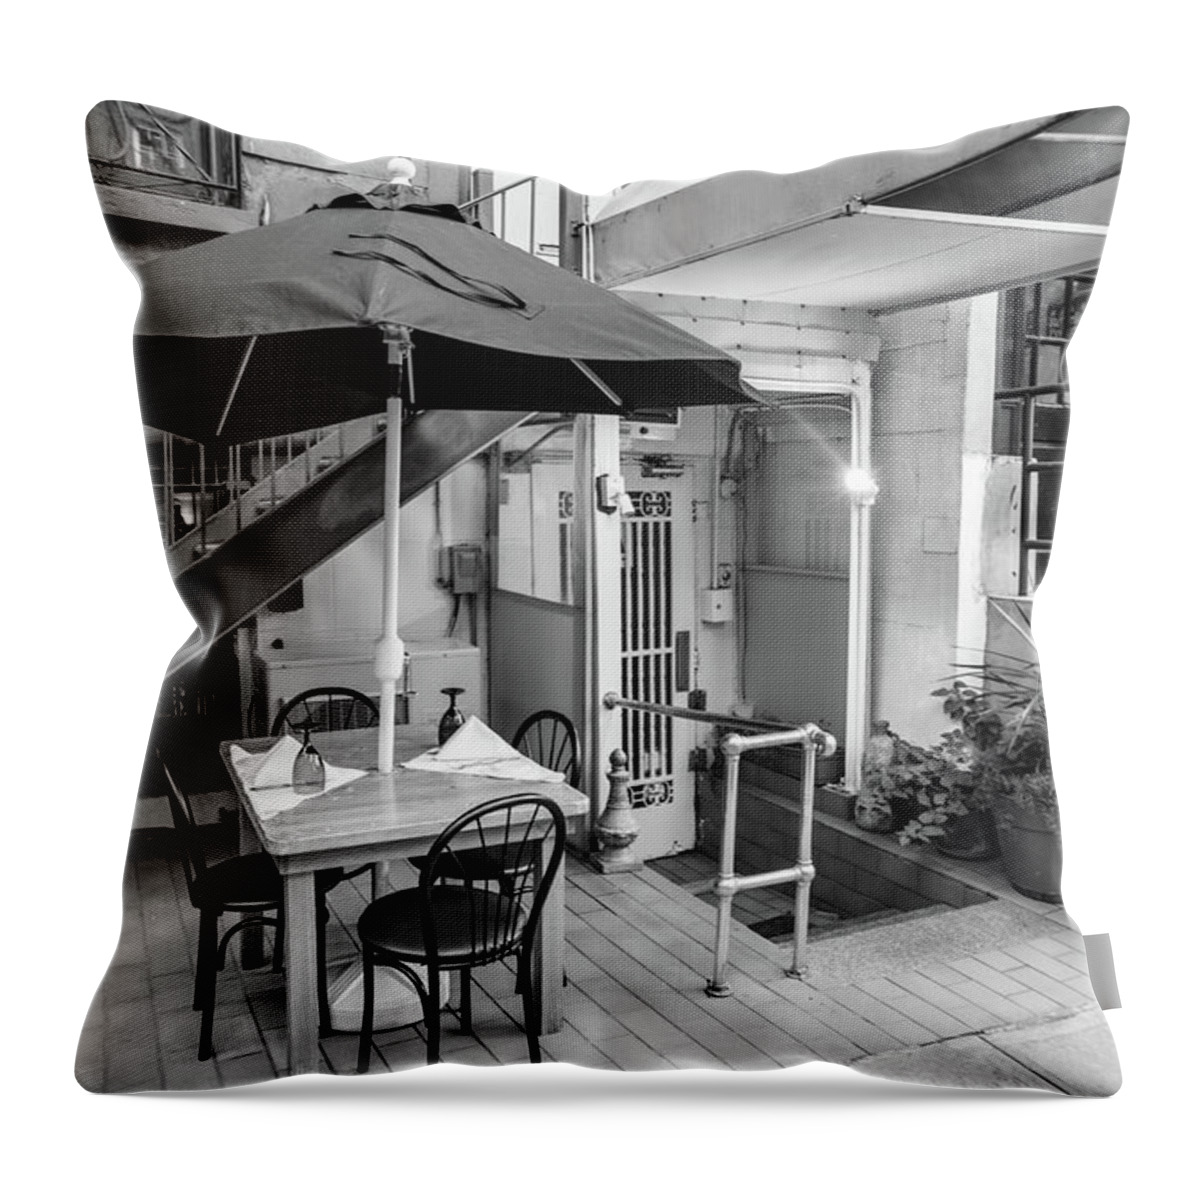 B&w Throw Pillow featuring the photograph NYC Store Front by John McGraw